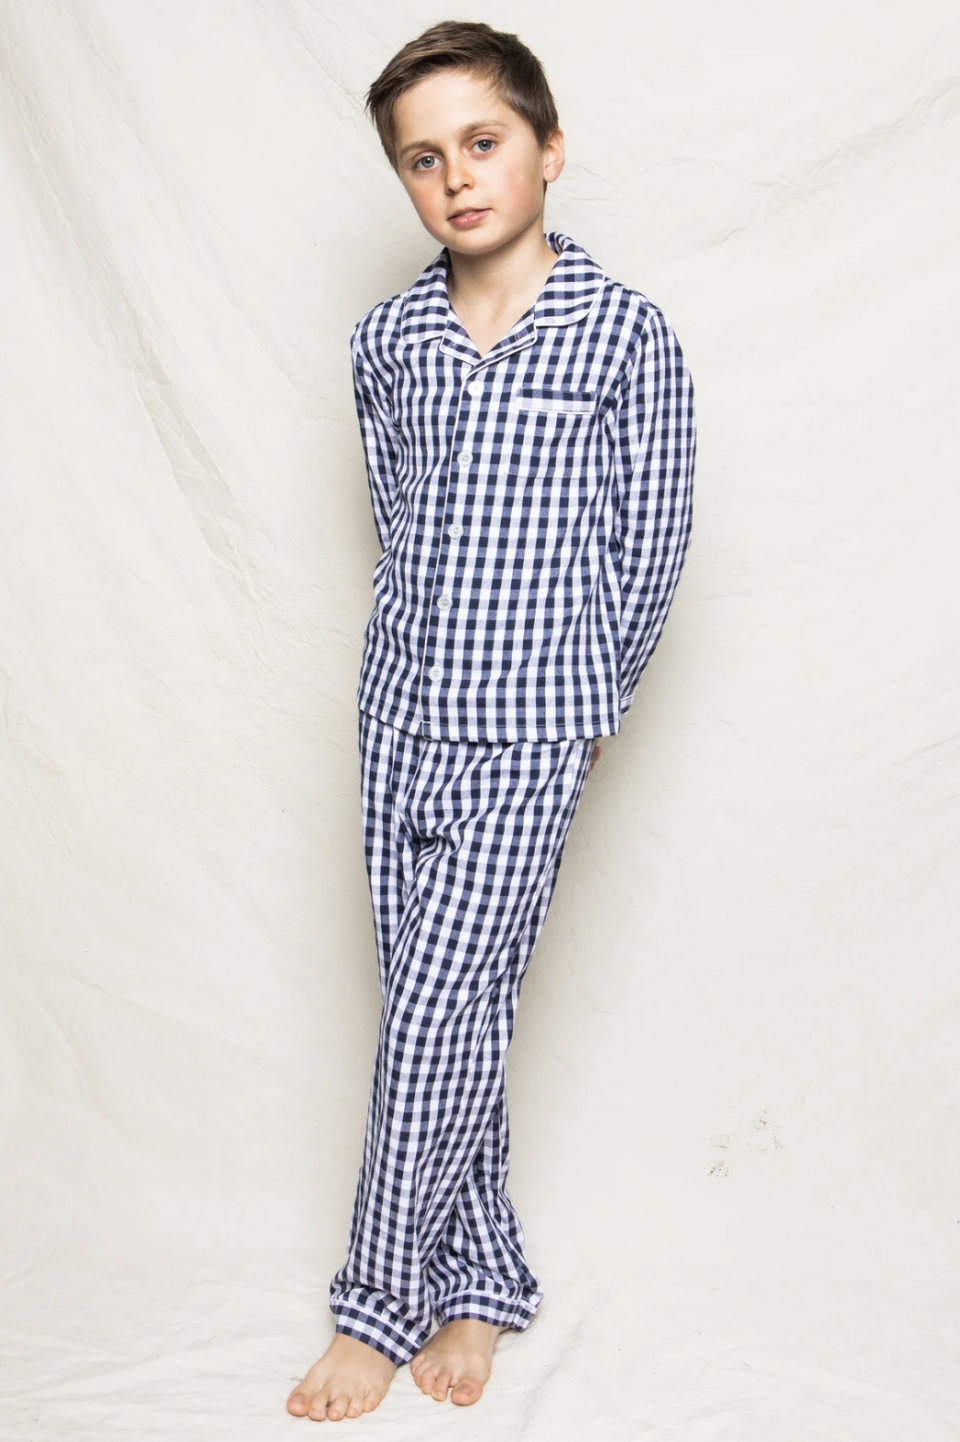 The Petite Plume Sample Sale Has Luxury Pajamas for Up to 70% Off